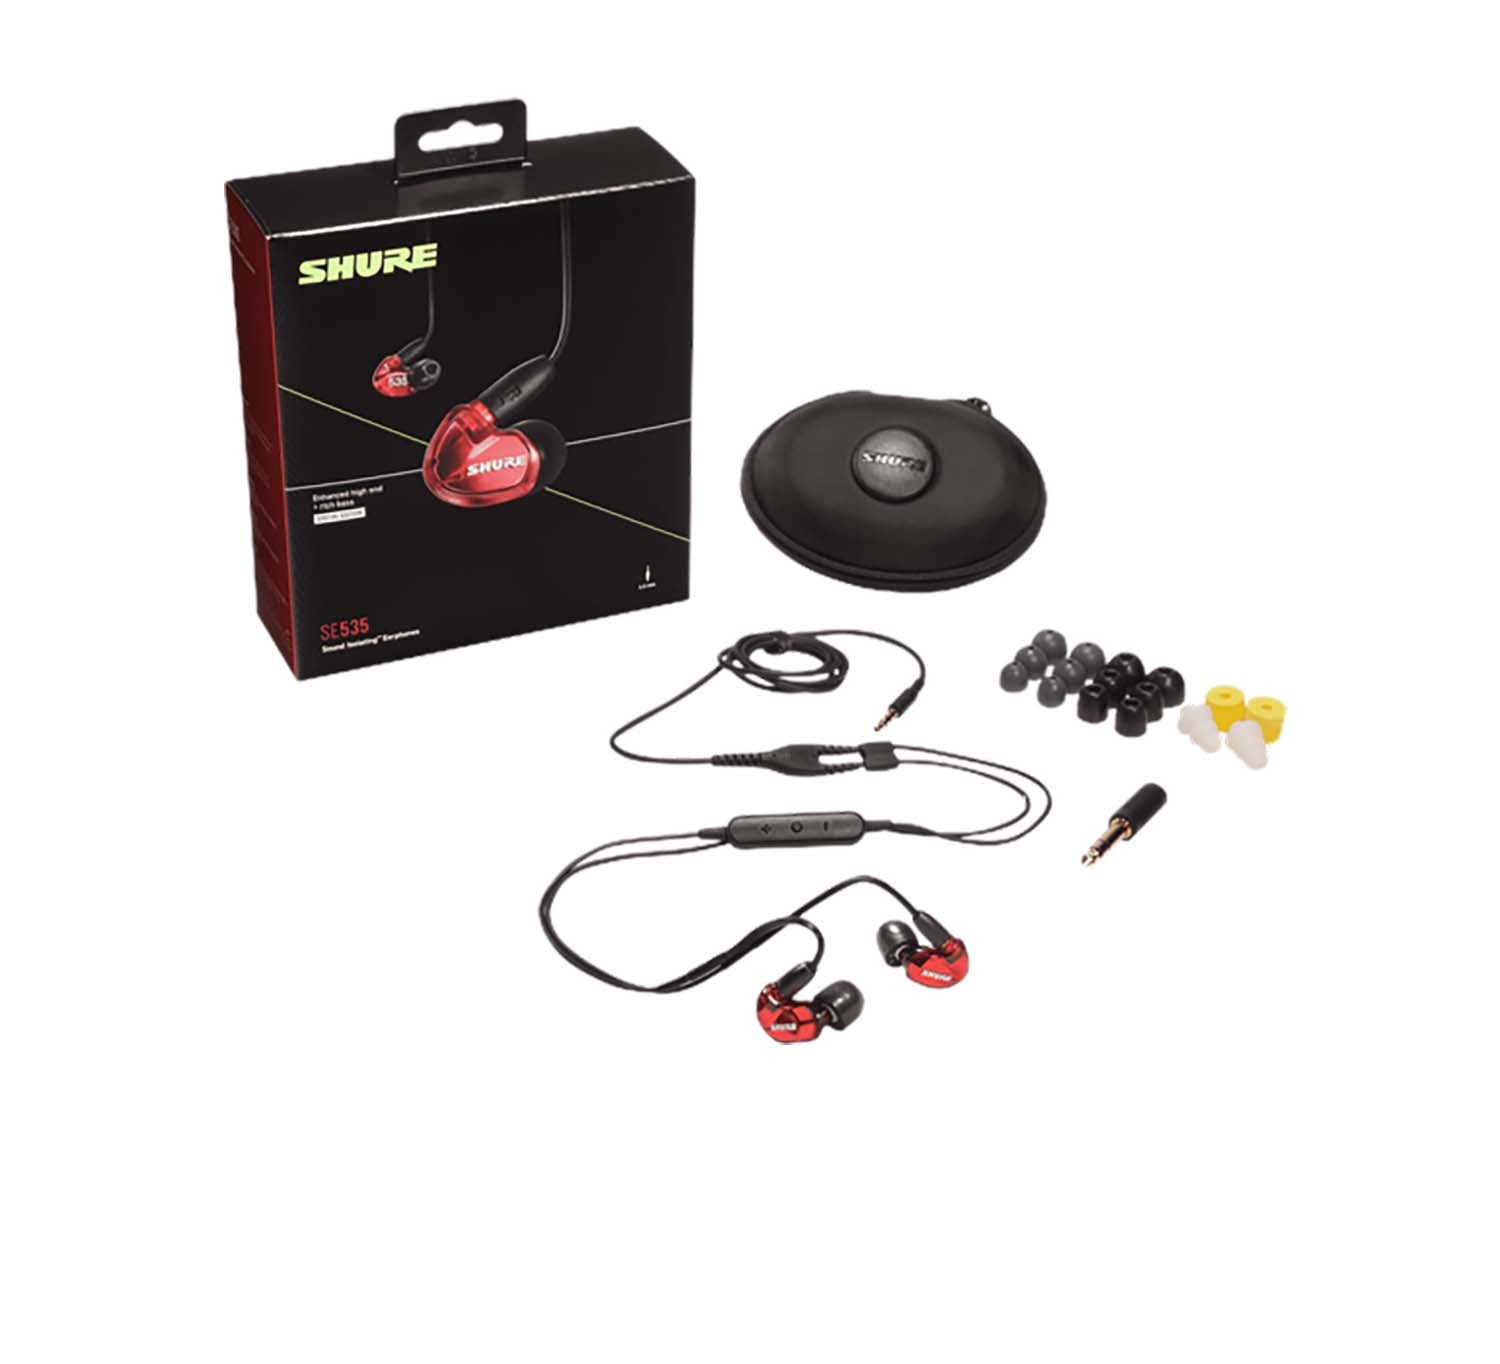 B-Stock: Shure SE535LTD+UNI Special Edition Sound Isolating Earphones - Red - Hollywood DJ